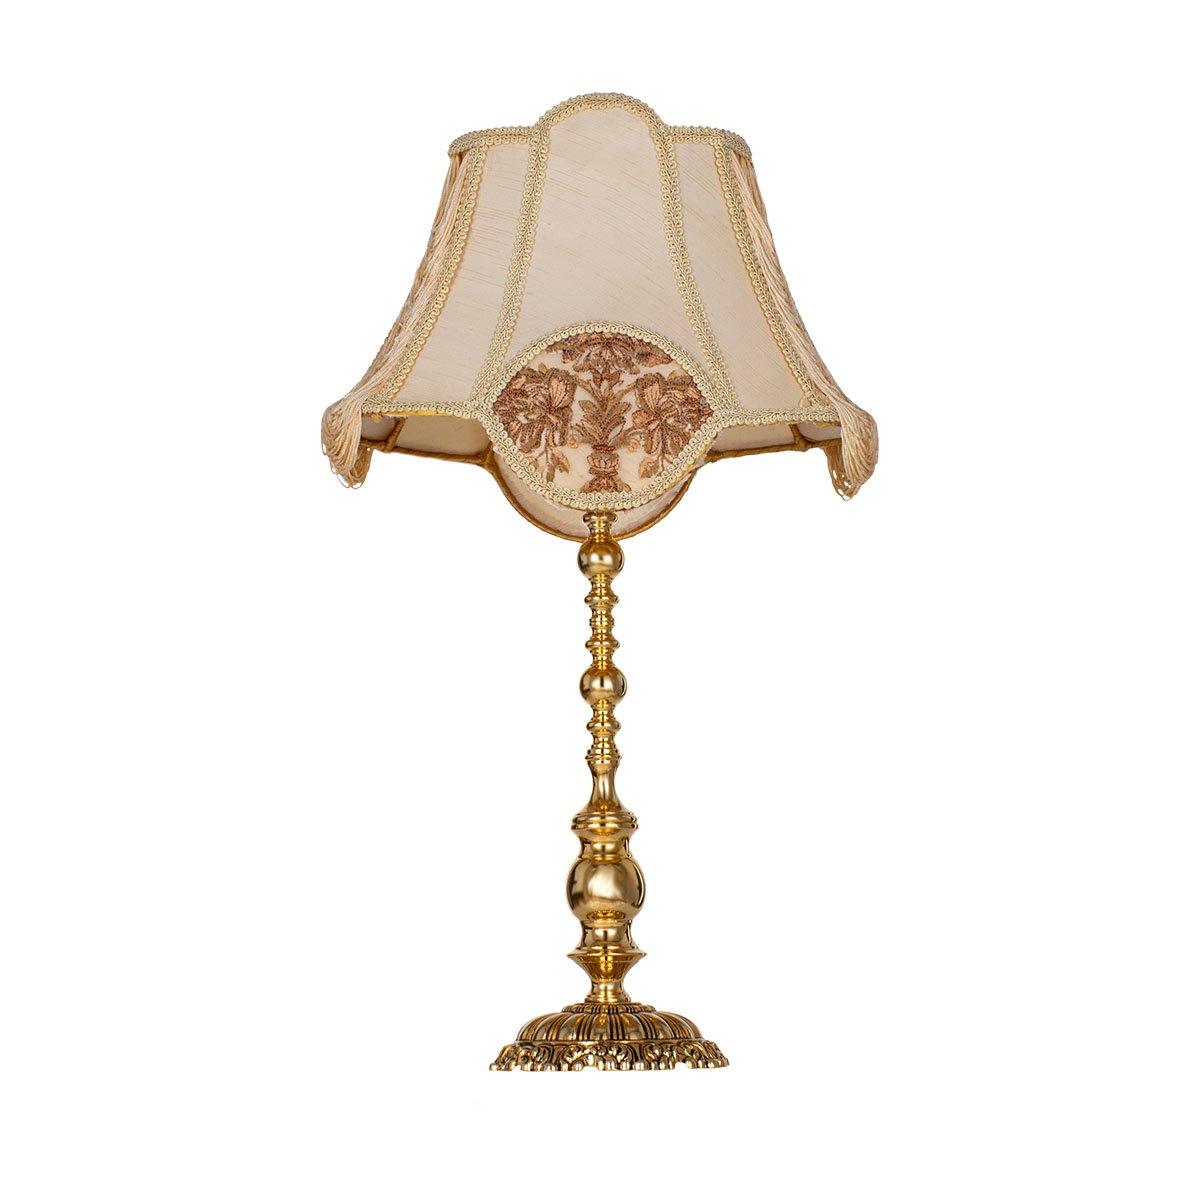 Asfour Crystal BrassTable Lamp Gold Ox. Without Crystal